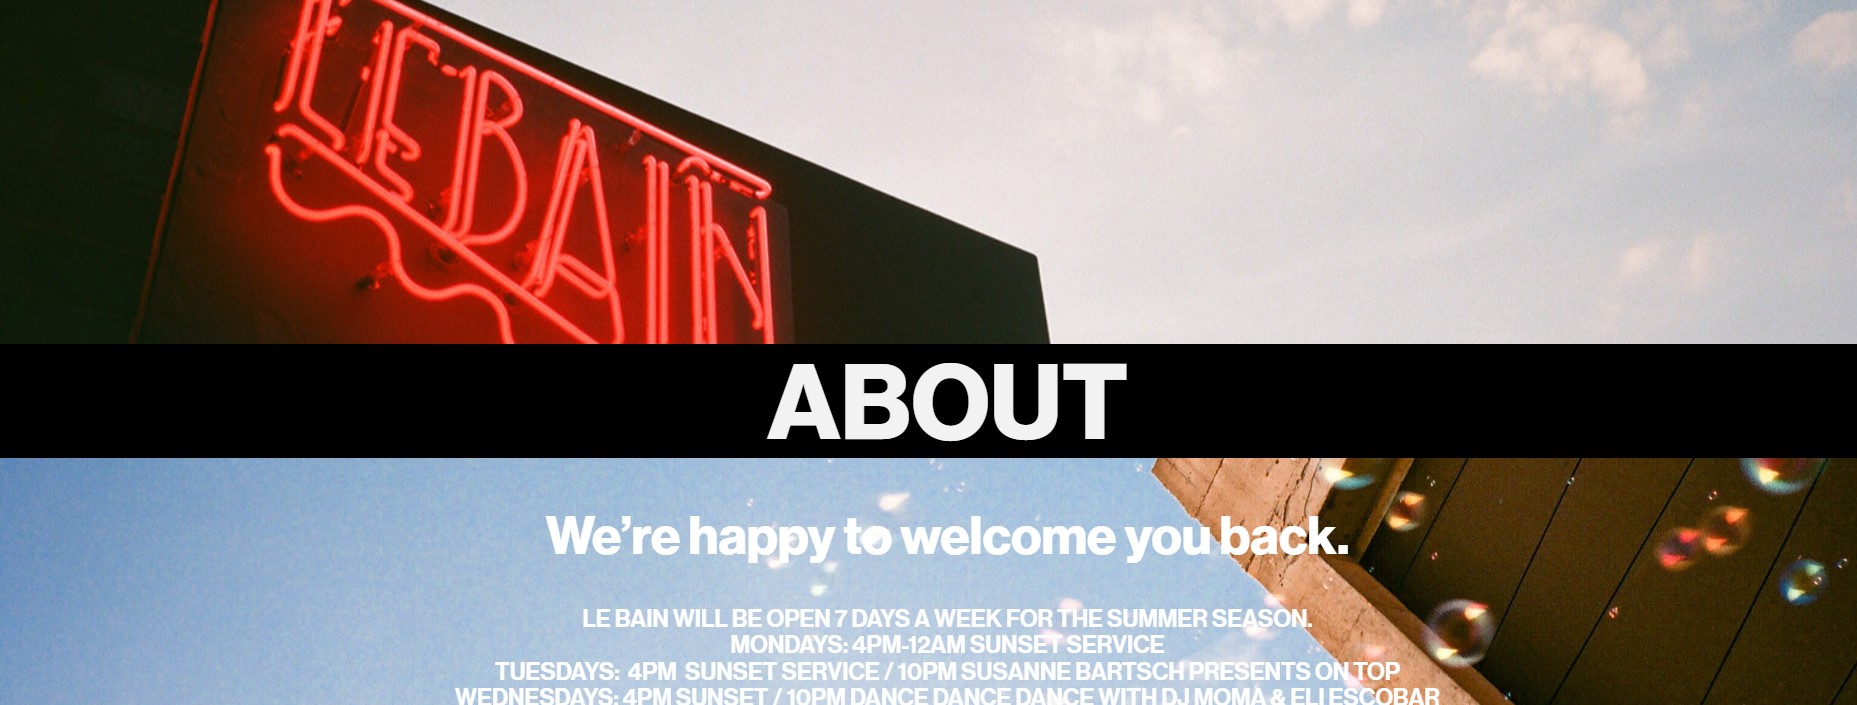 Le Bain (Party for Less)